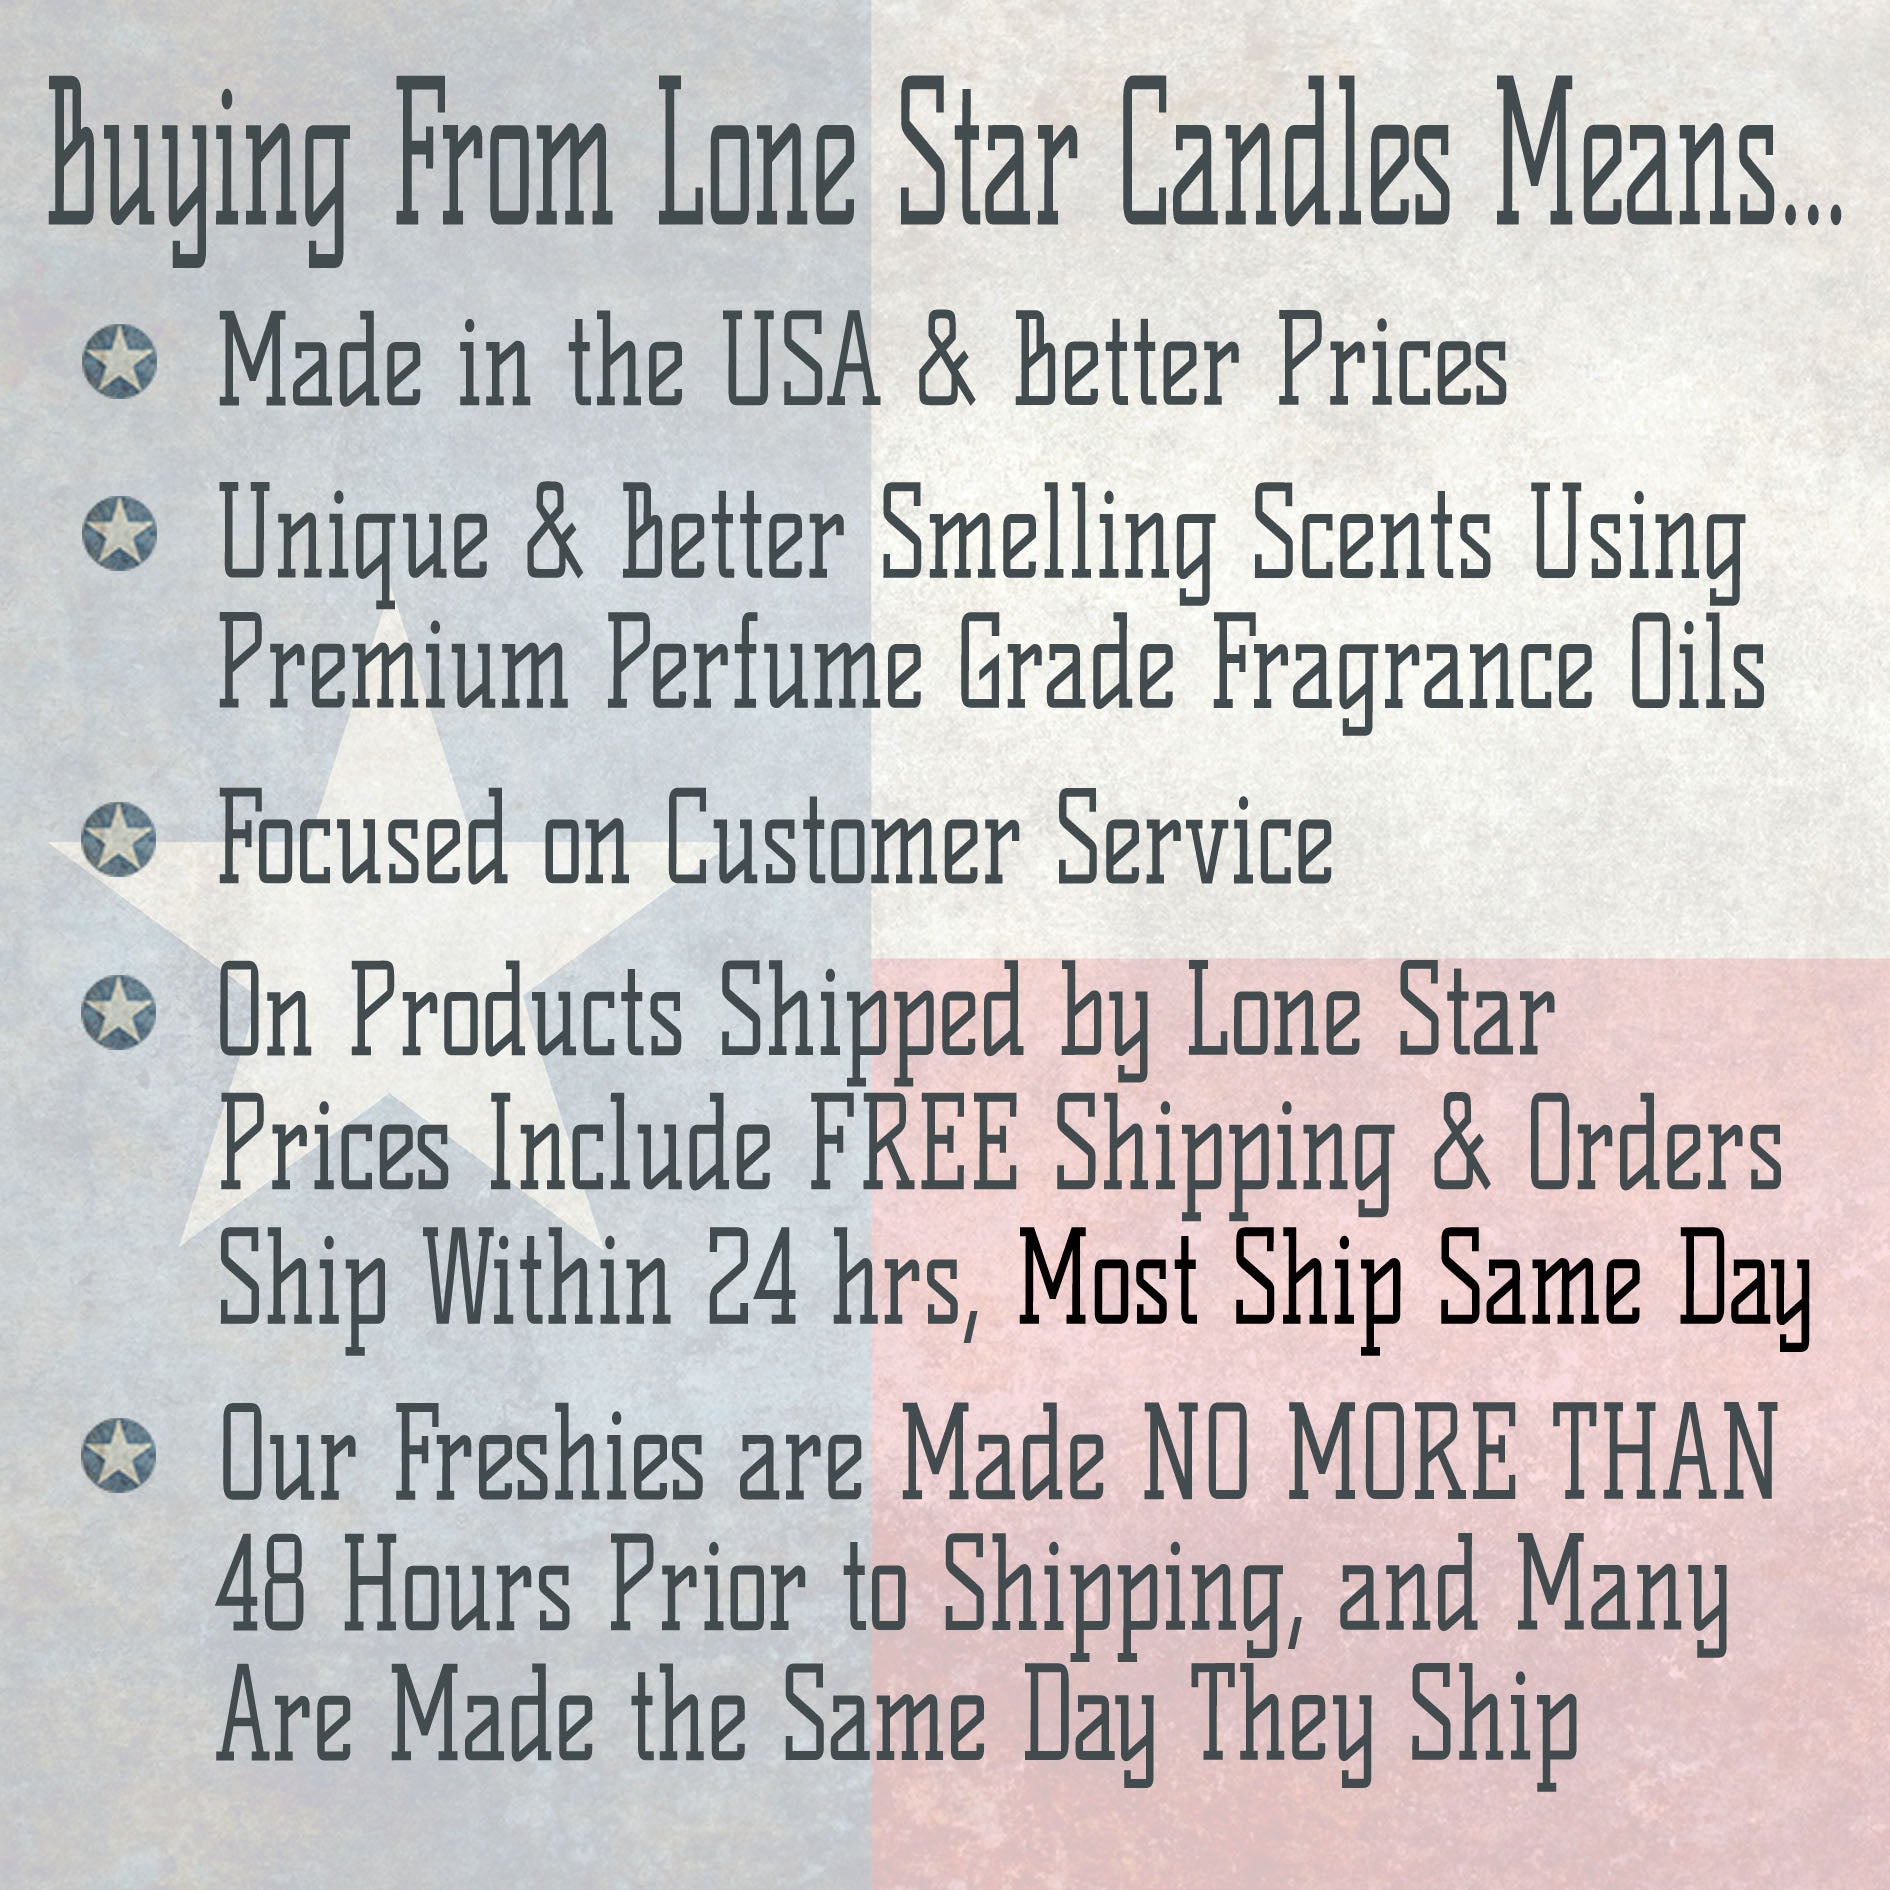 Cranberries & Sandalwood, Lone Star Candles & More's Premium Strongly Scented Freshies, A Delightful Mix of Spiced Cranberry, & Sandalwood, Car & Air Freshener, USA Made in Texas, Gnome 1-Pack